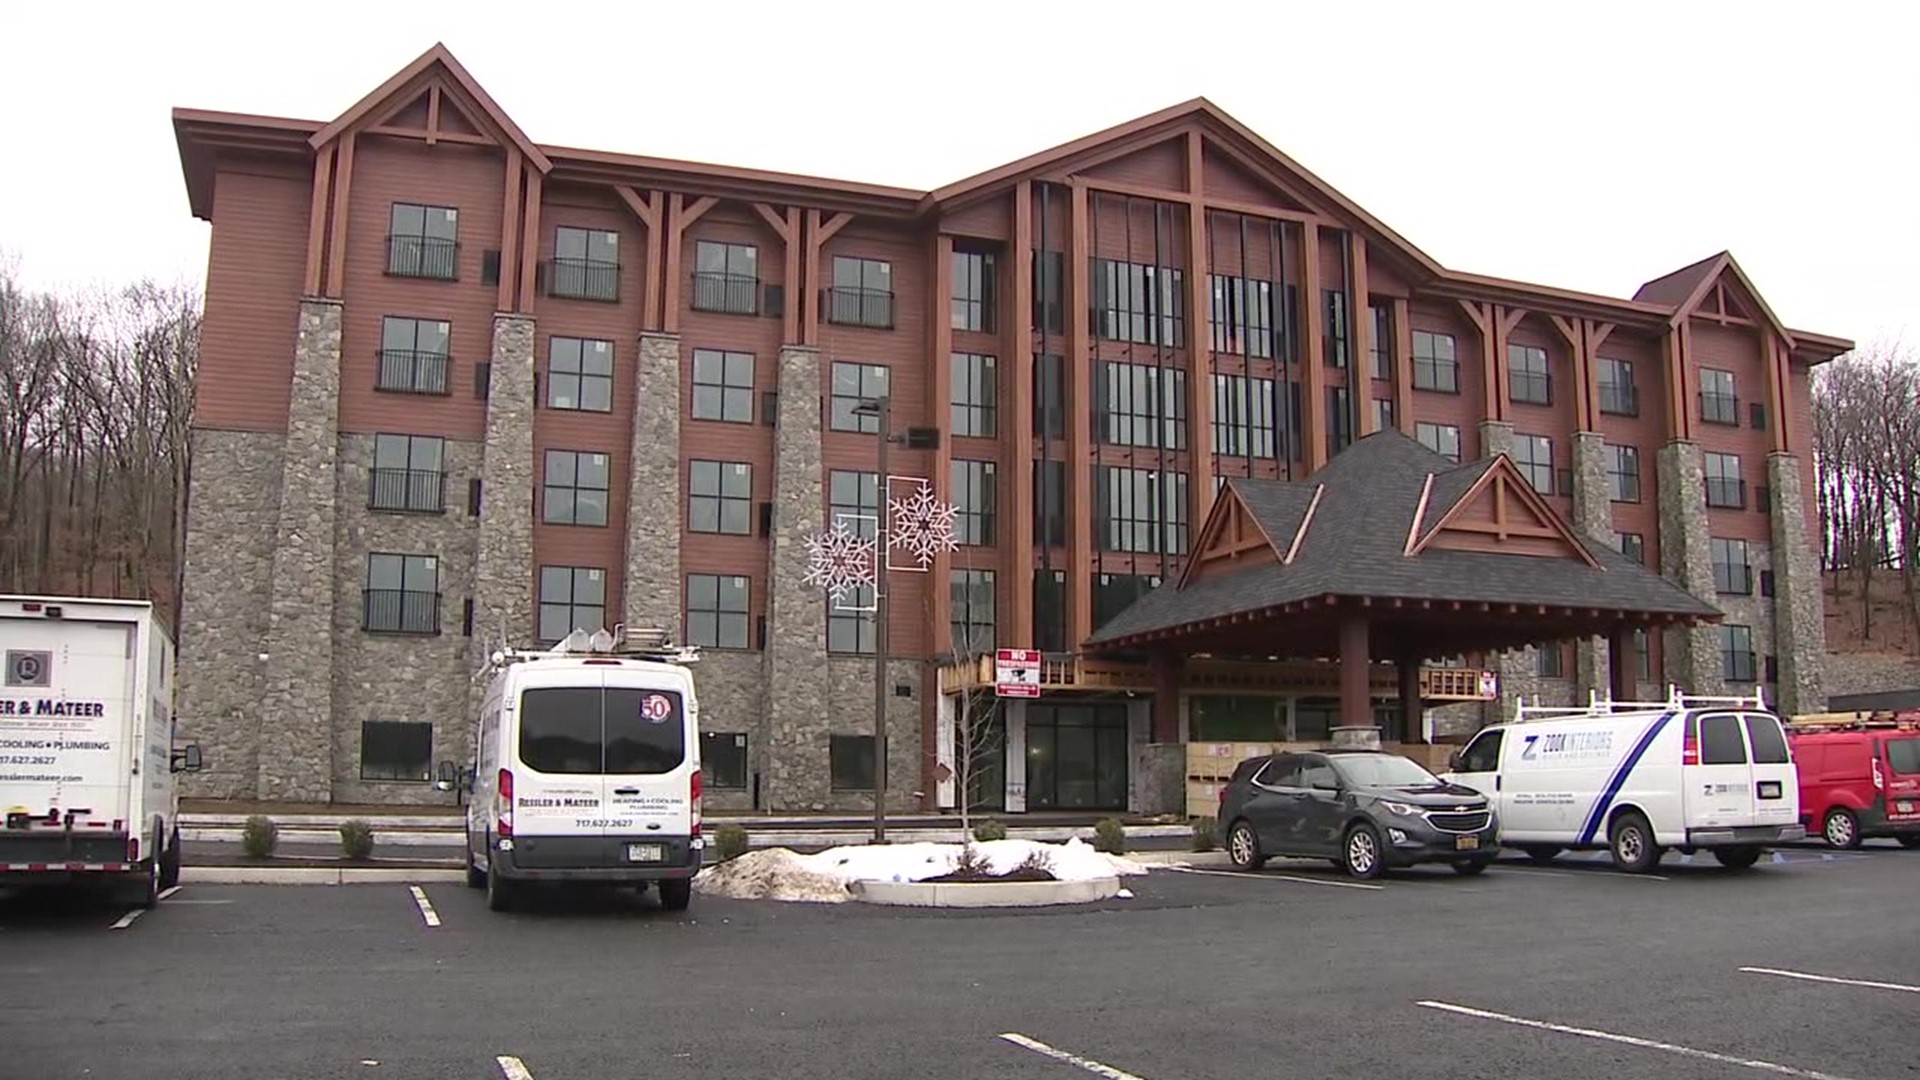 While it's not open yet, Newswatch 16's Amanda Eustice shows us what to expect at the new hotel near Mount Pocono.